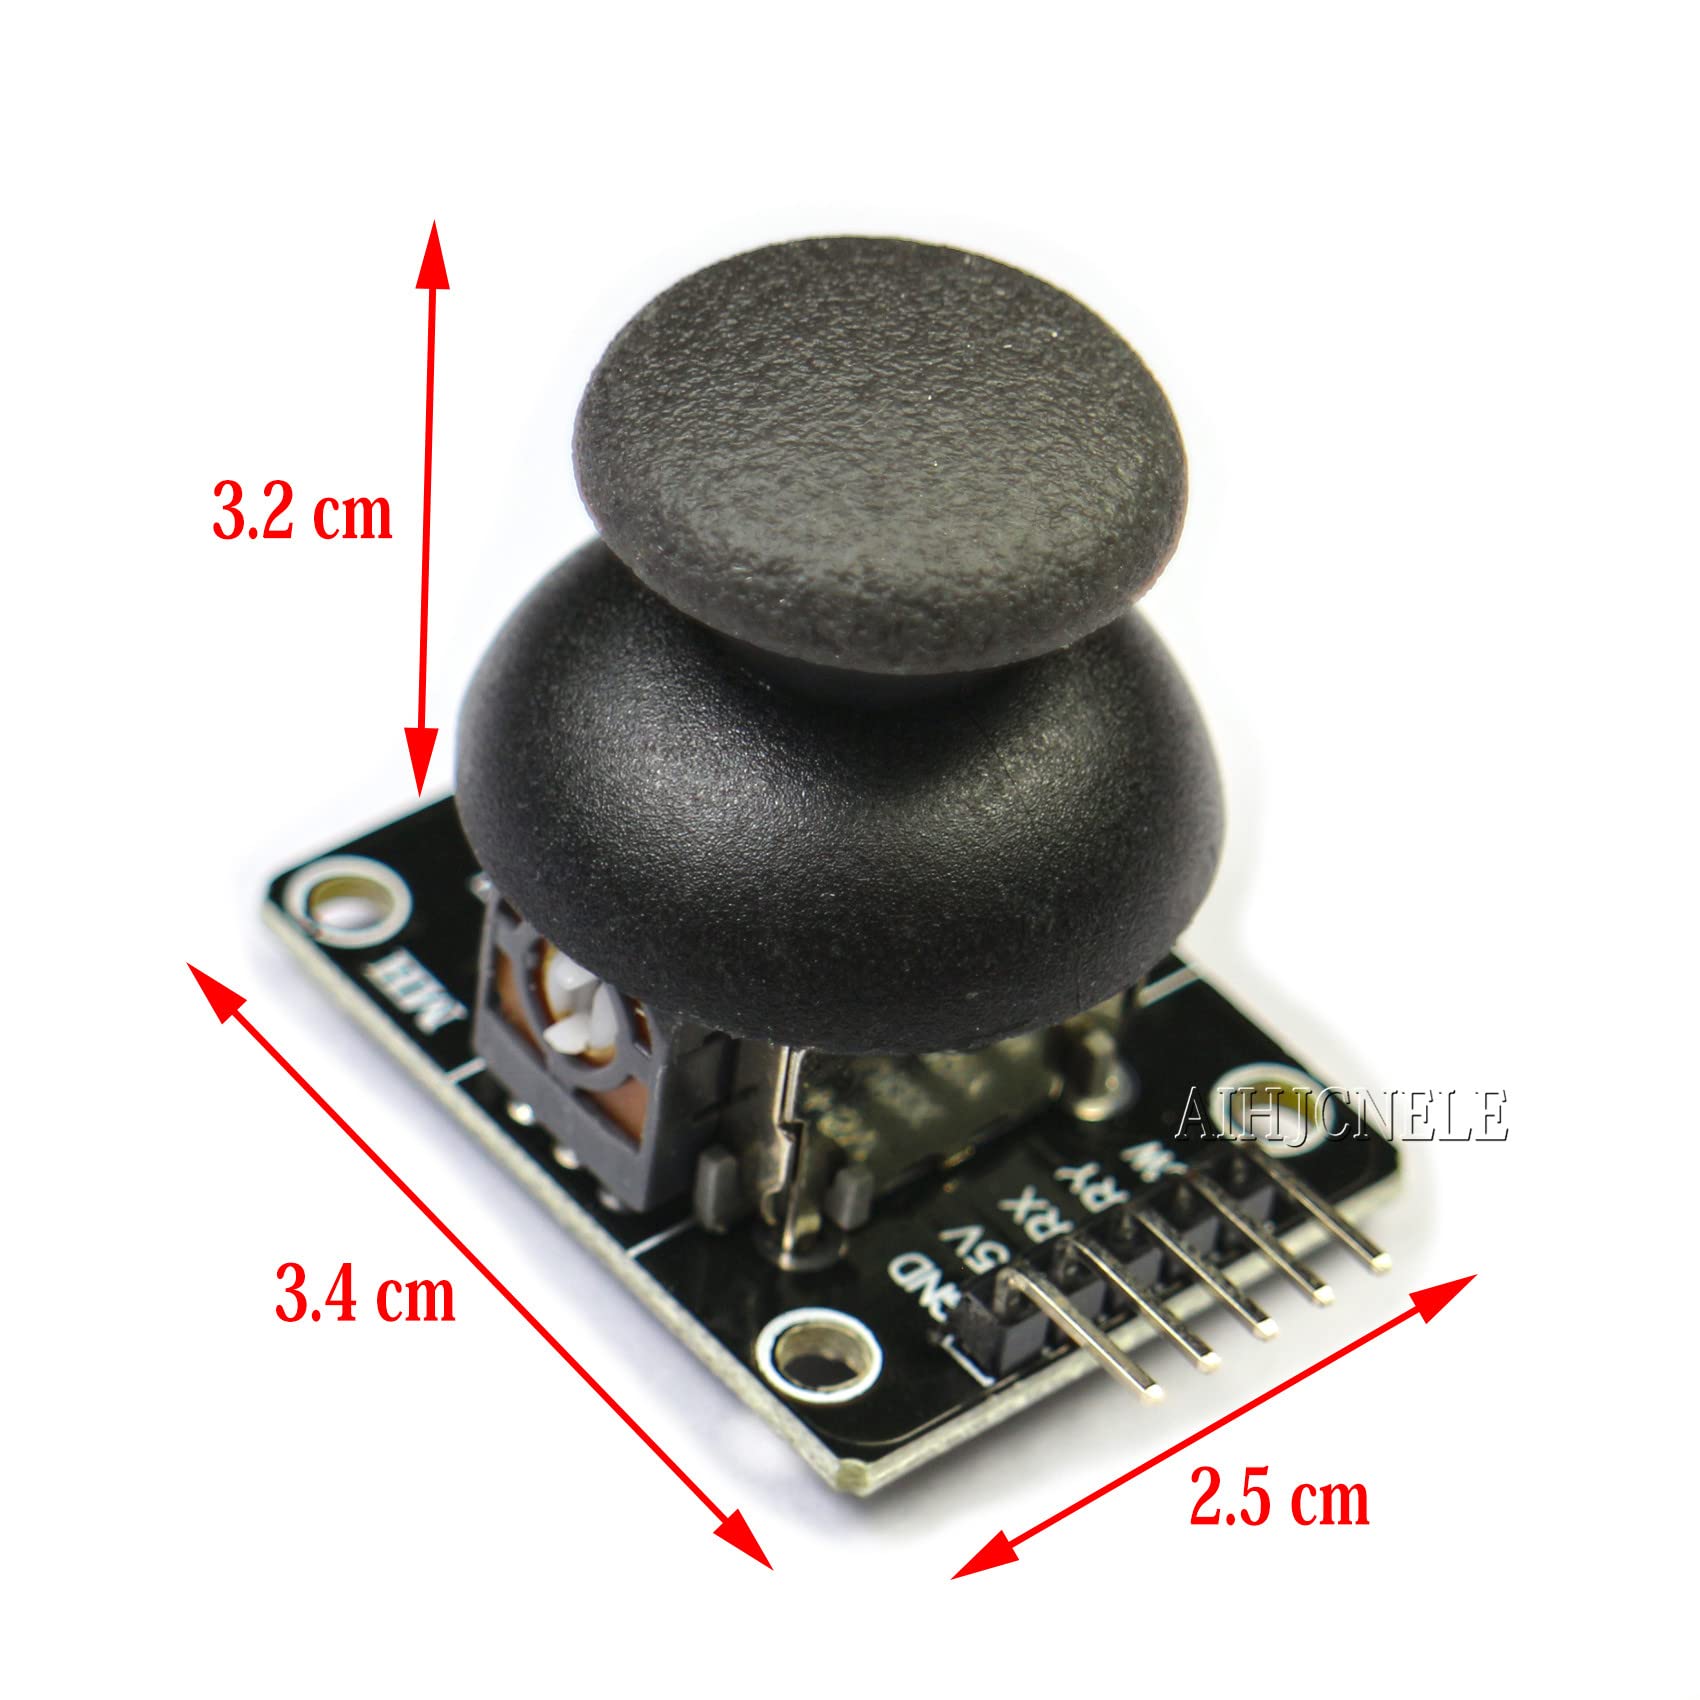 AIHJCNELE 5pcs Dual Axis XY Joystick Module Game Control Lever Sensor Game Button Controller Breakout Shield Joystick Analog Thumb Stick KY-023 with Dupont Jumper Cable Line for Arduino PS2 Switch